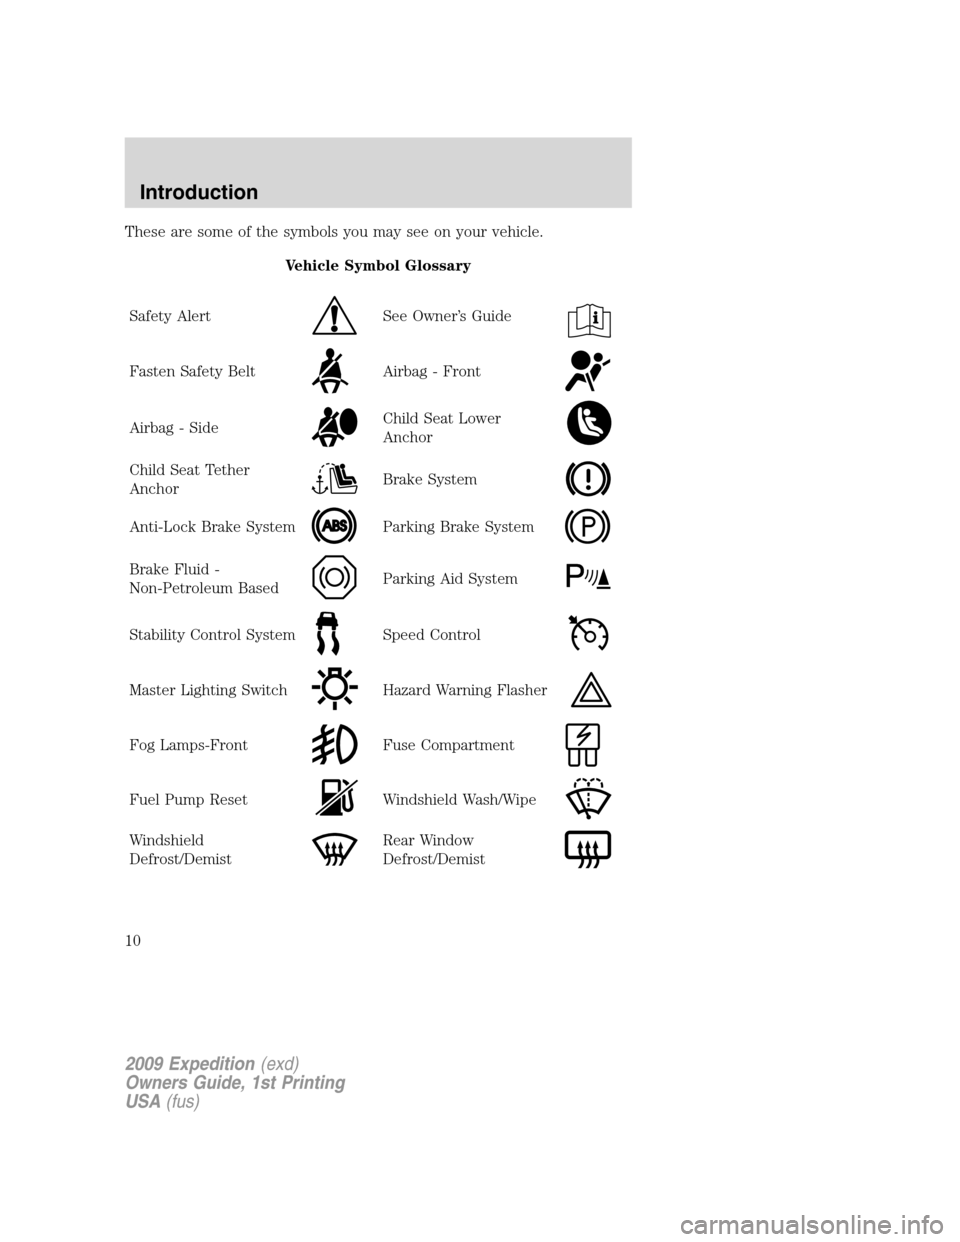 FORD EXPEDITION 2009 3.G Owners Manual These are some of the symbols you may see on your vehicle.
Vehicle Symbol Glossary
Safety Alert
See Owner’s Guide
Fasten Safety BeltAirbag - Front
Airbag - SideChild Seat Lower
Anchor
Child Seat Tet